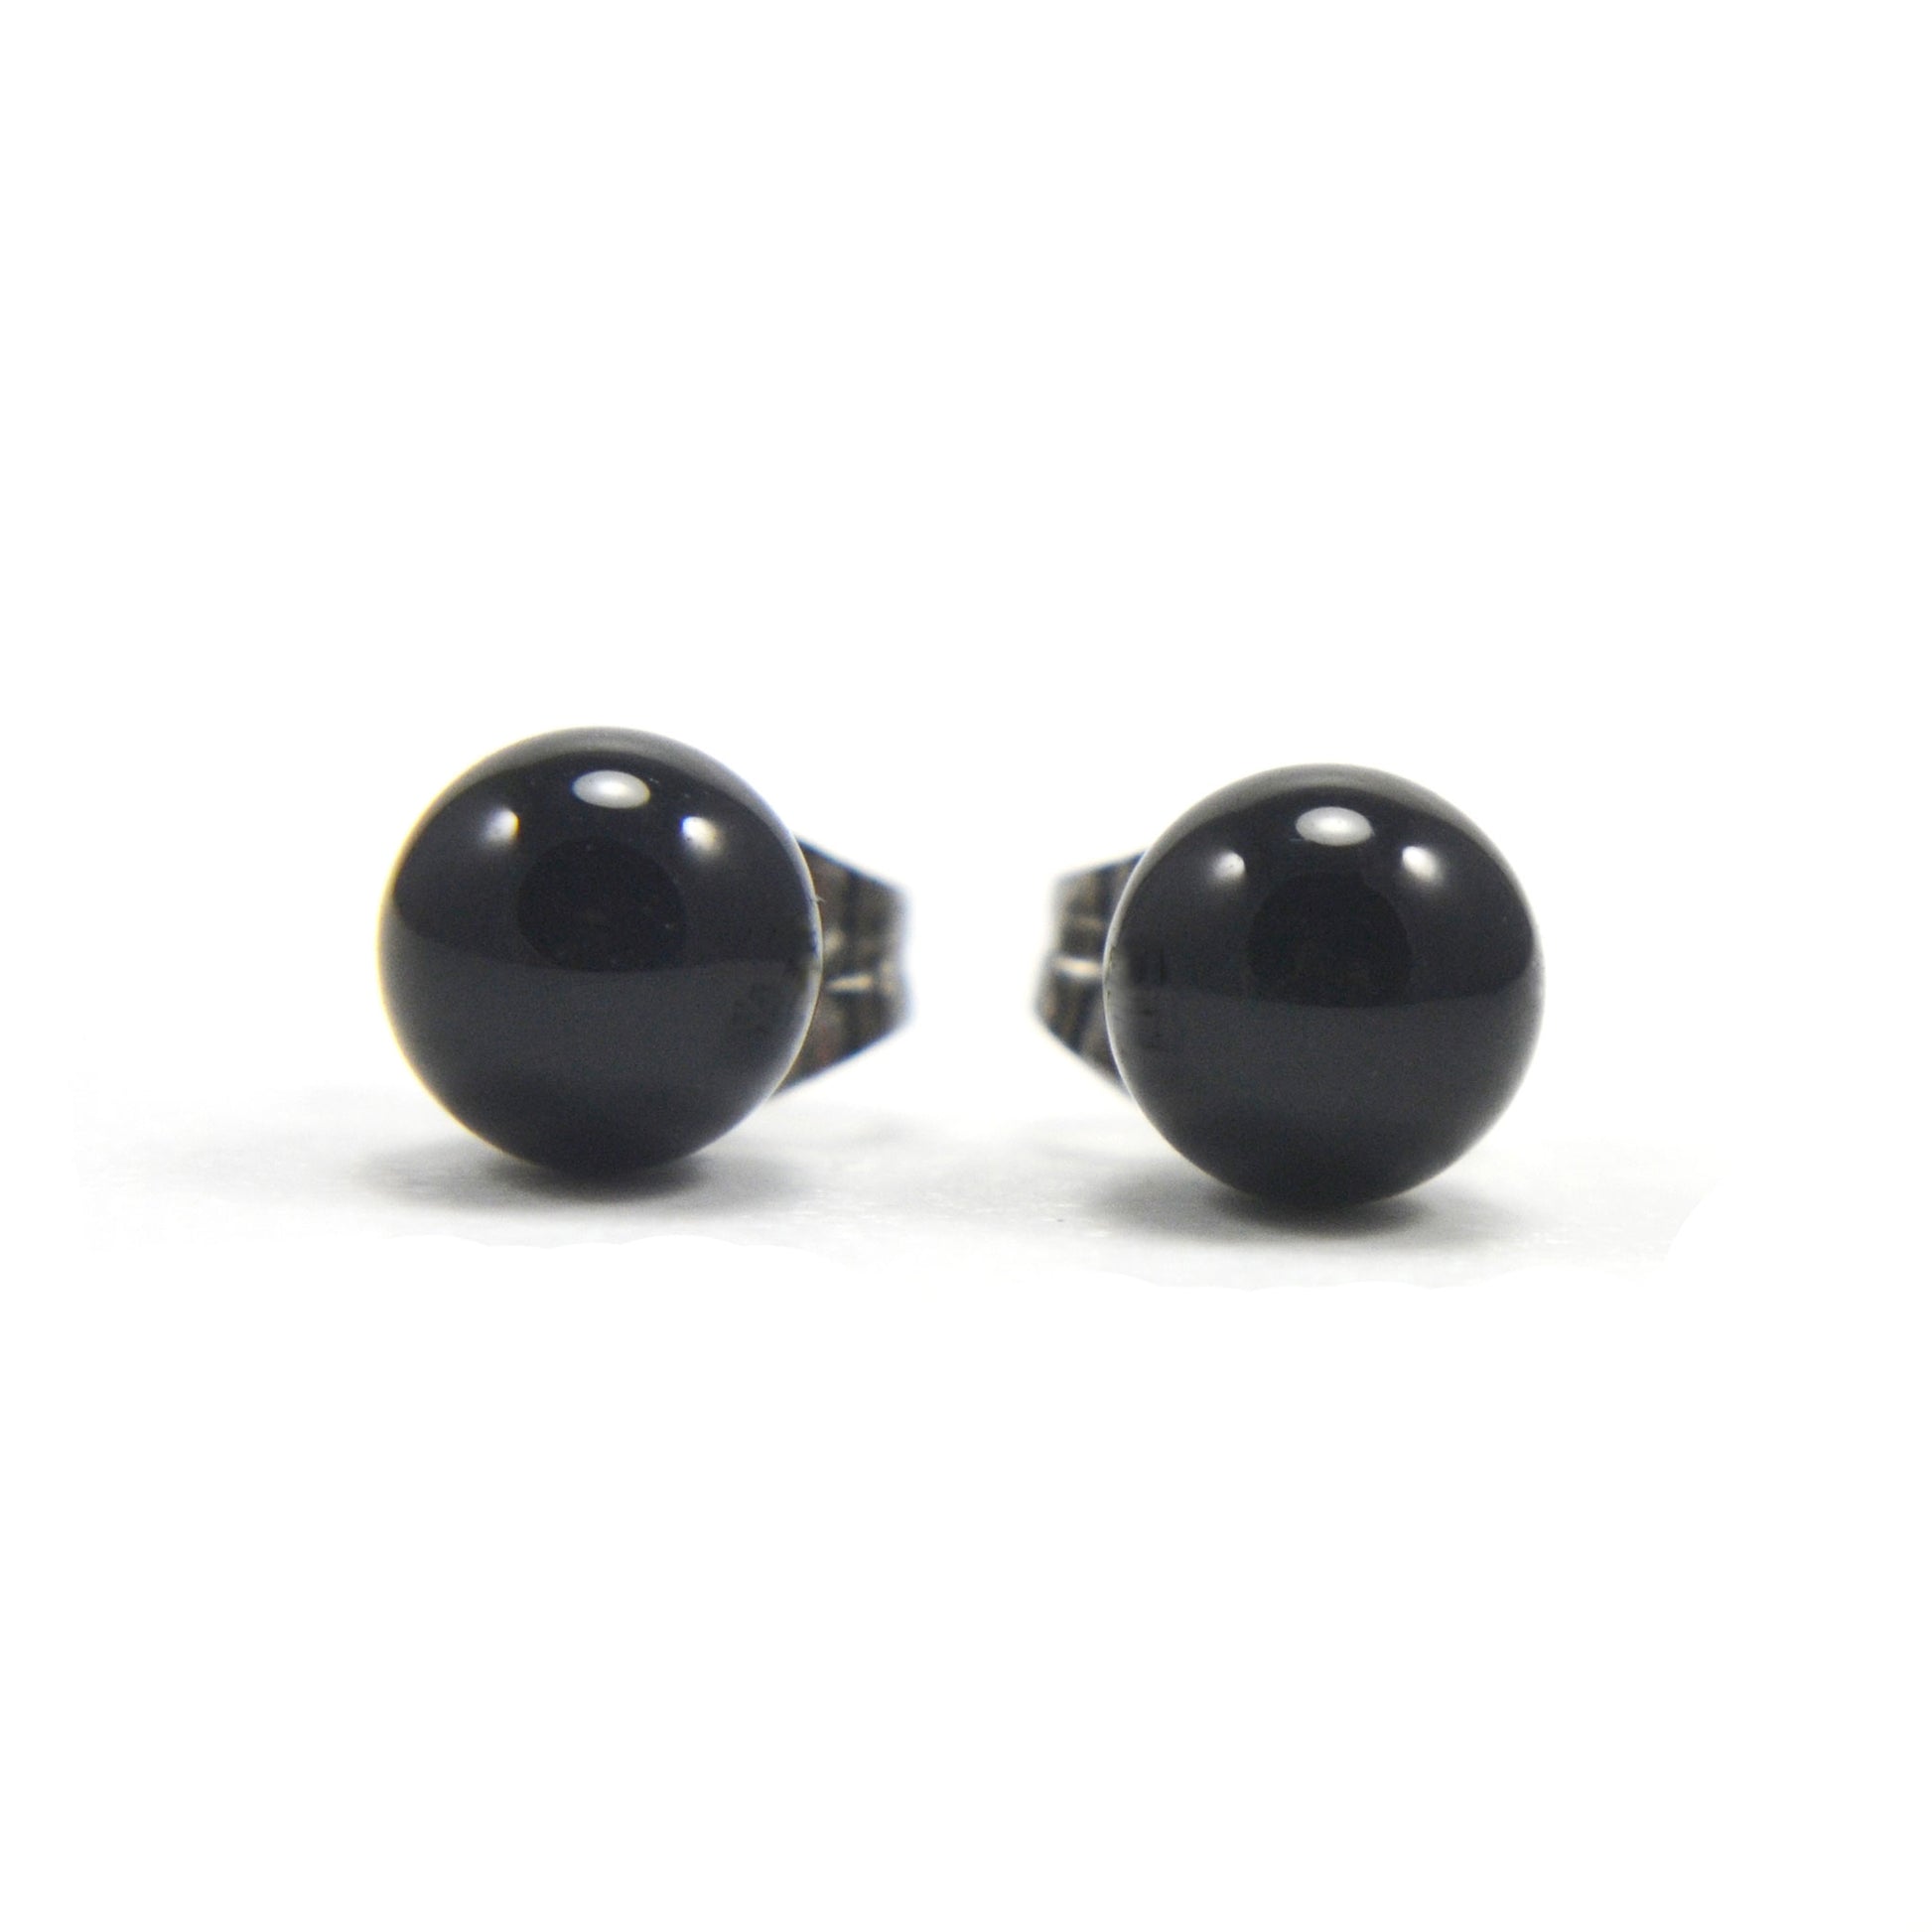 Front view of black Onyx ball stud earrings on white background